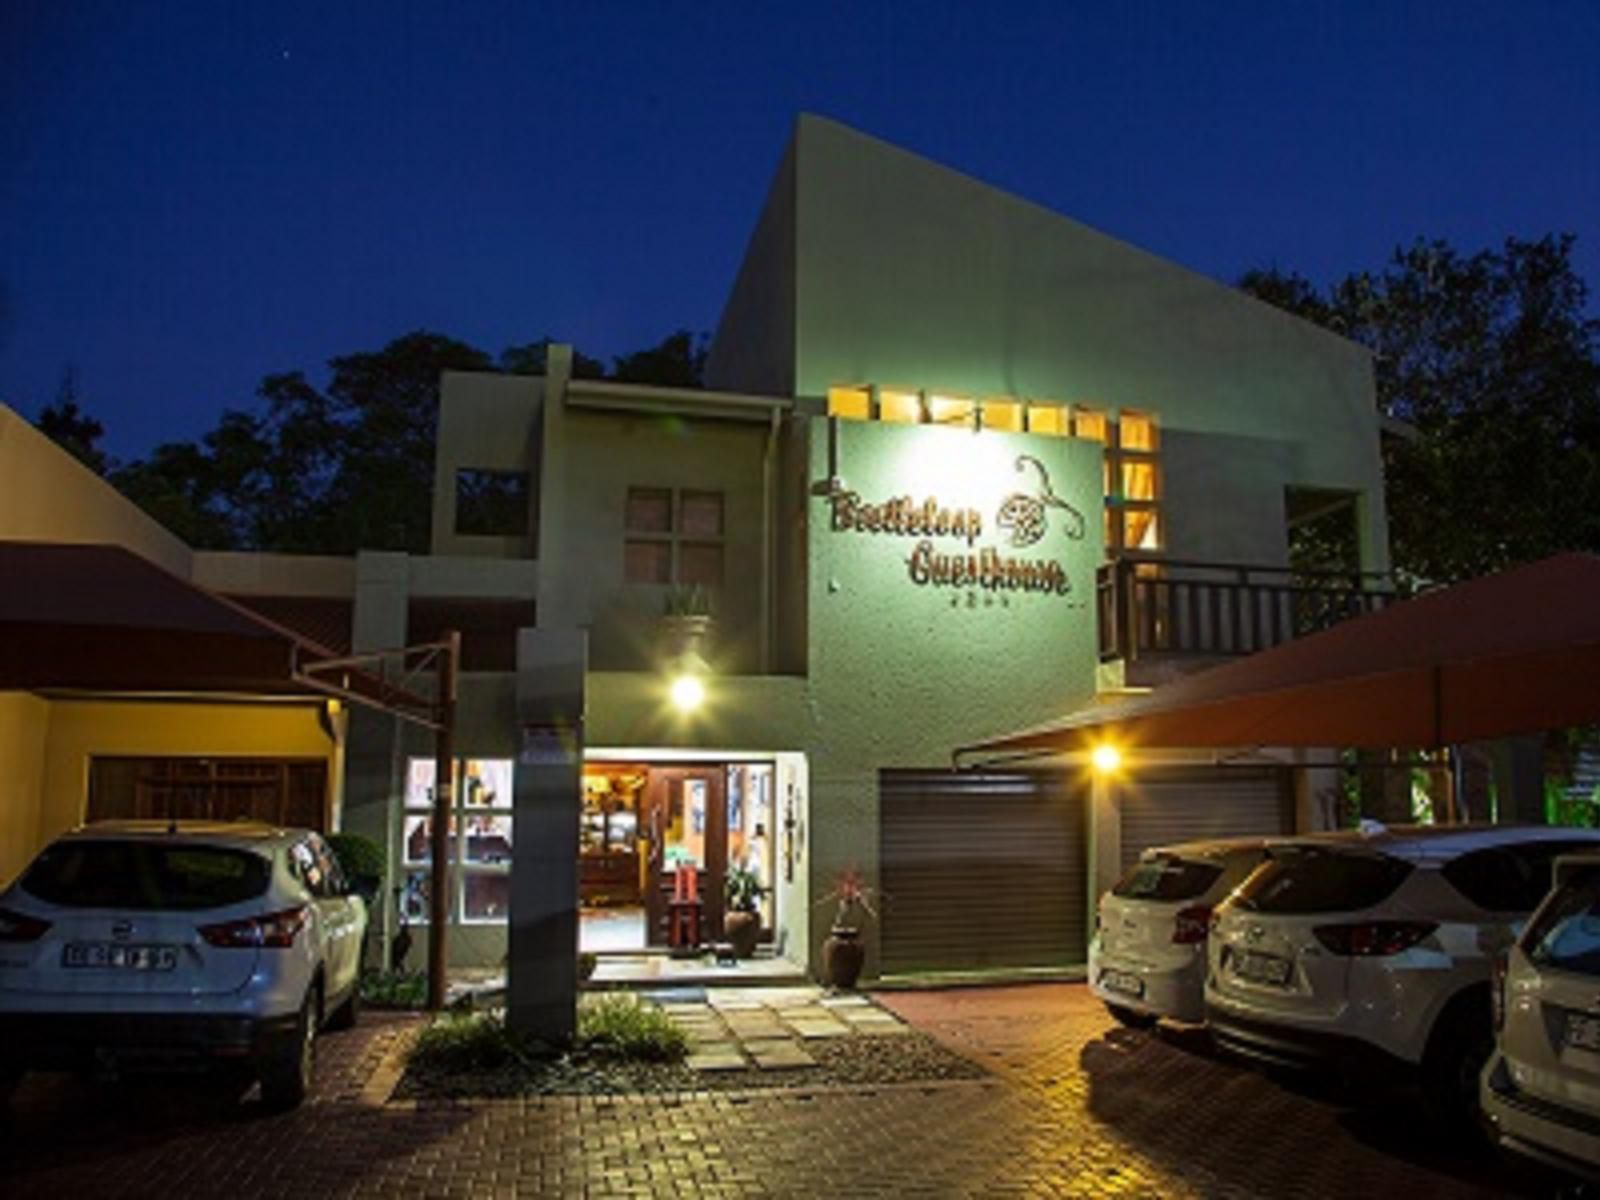 Beetleloop Guesthouse Nelspruit Mpumalanga South Africa Complementary Colors, Car, Vehicle